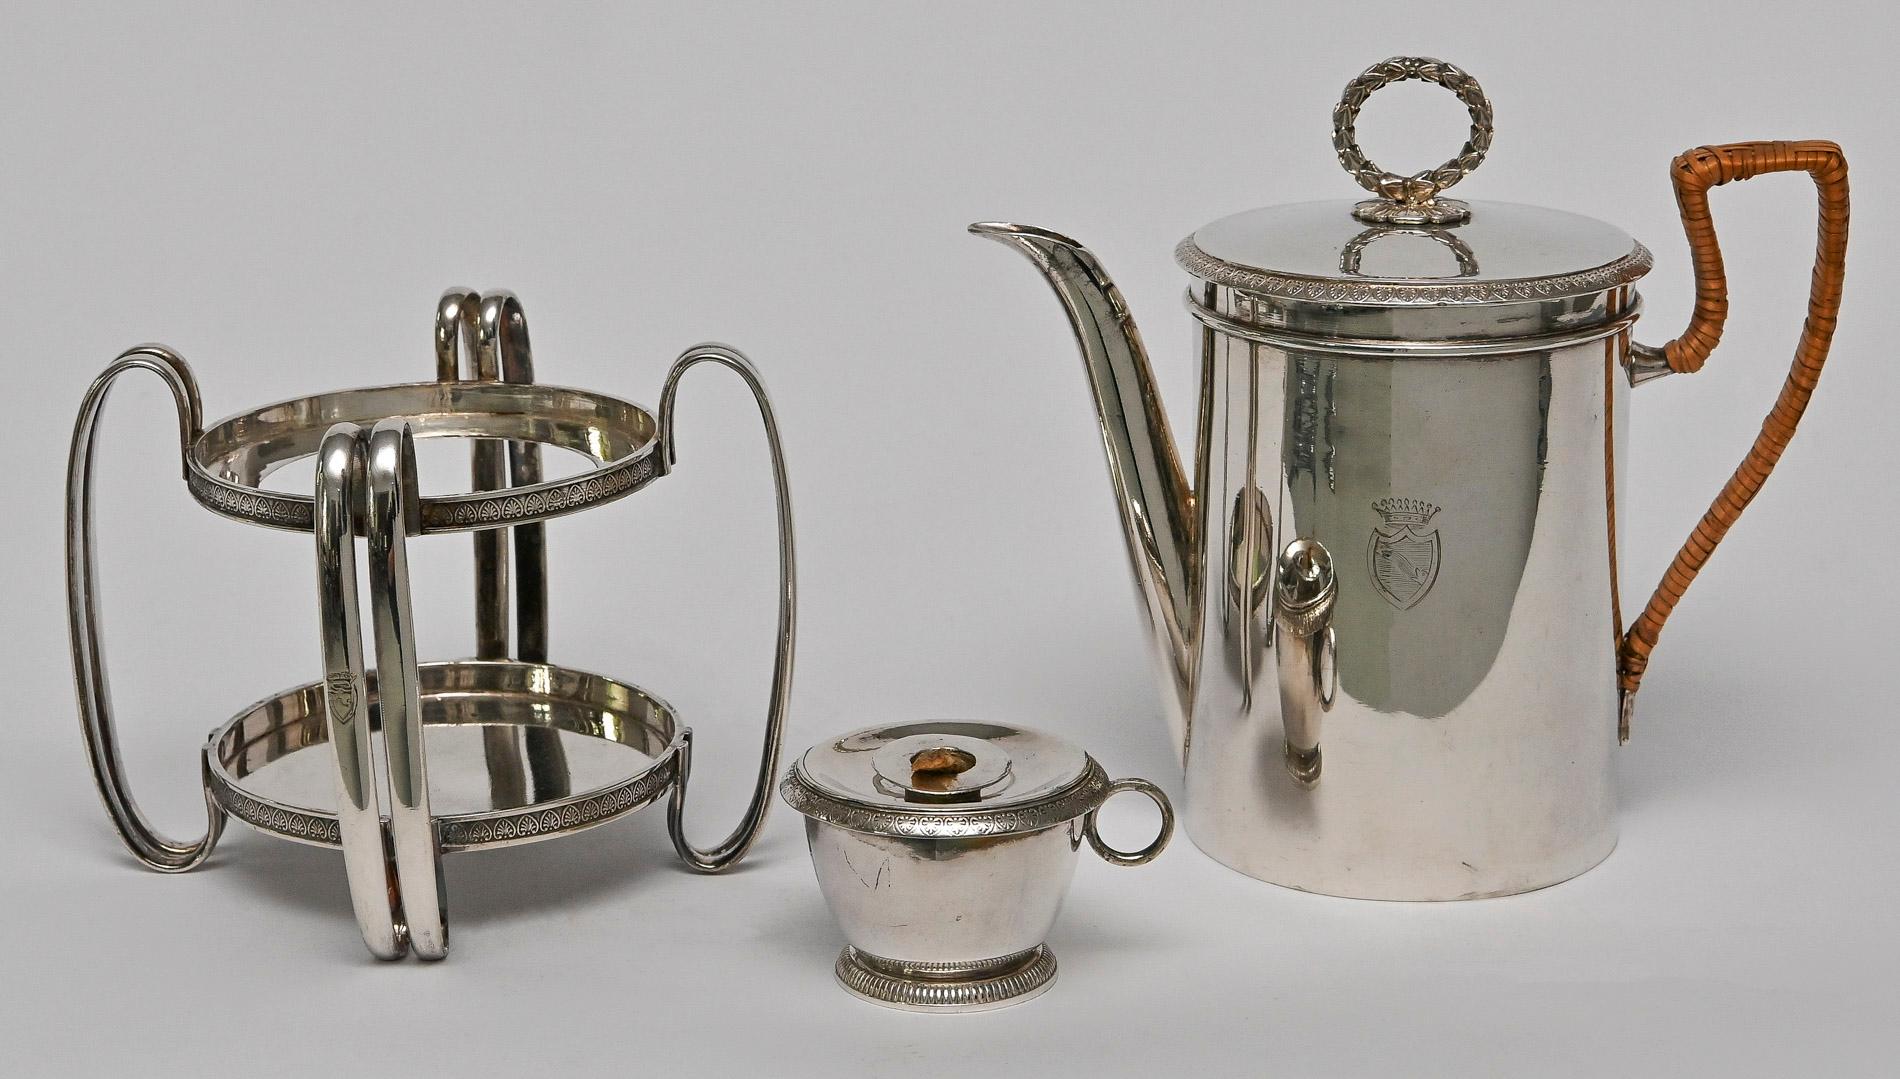 Tea, coffee or water pot with rechaud, Vienna about 1817
silver 15 lot, like more as sterling silver Engraved coat of arms 
The weight is 860 gr Silver, the content of the jug is 0,6 lit. 
A very fine quality of workmanship, with knob as a laurel